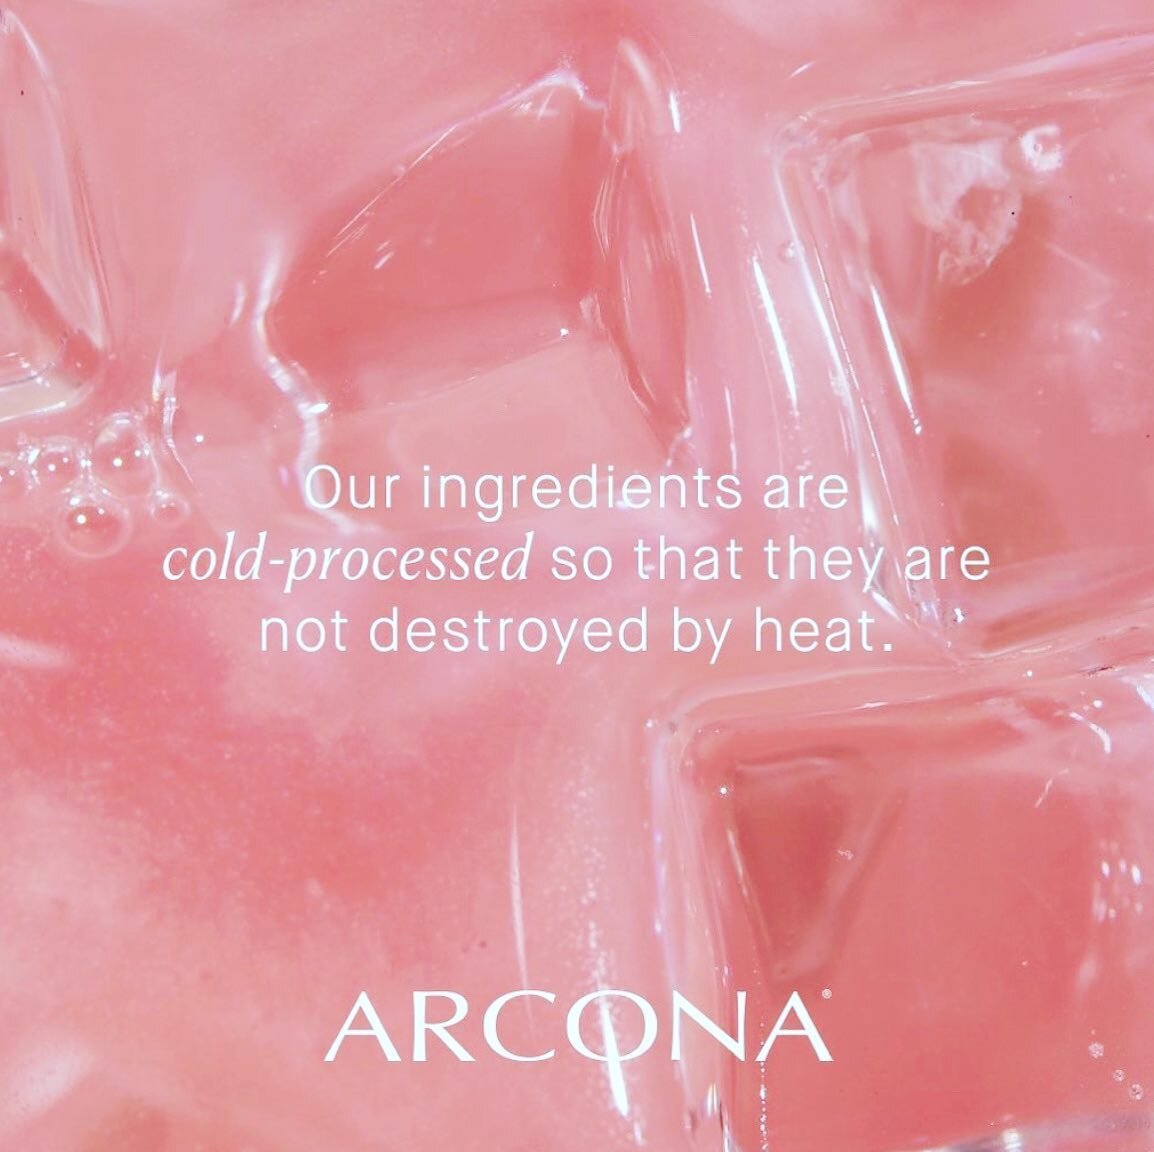 🧊🌸🌾🍄🌿🍒🍋🍊🍍🥝🧊
The key to ARCONA&rsquo;s effectiveness is the active ingredients and the way they are combined and processed. They use only the best, clinically studied ingredients and cold-process all products in small batches to keep them a